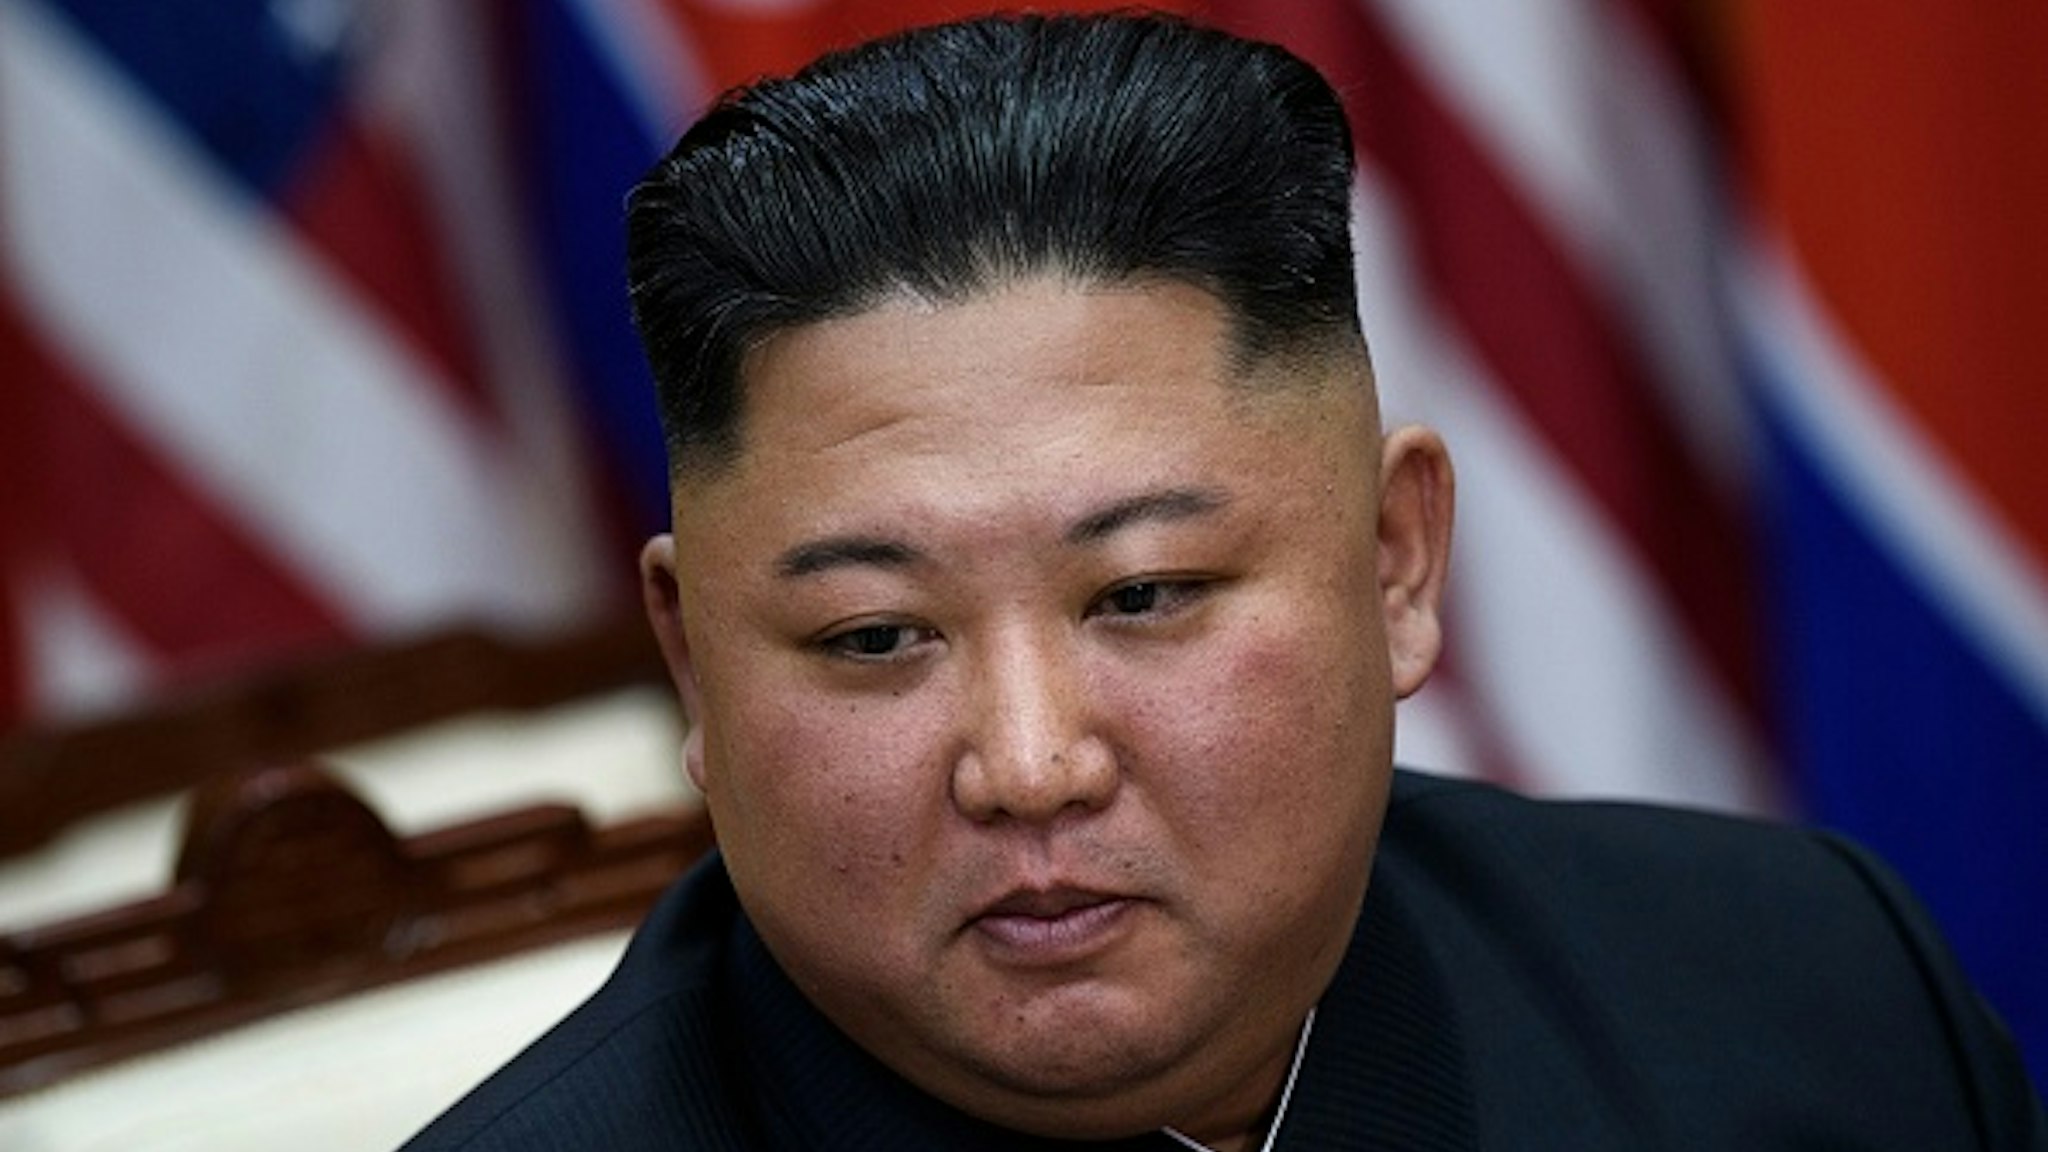 TOPSHOT - North Korea's leader Kim Jong Un before a meeting with US President Donald Trump on the south side of the Military Demarcation Line that divides North and South Korea, in the Joint Security Area (JSA) of Panmunjom in the Demilitarized zone (DMZ) on June 30, 2019.